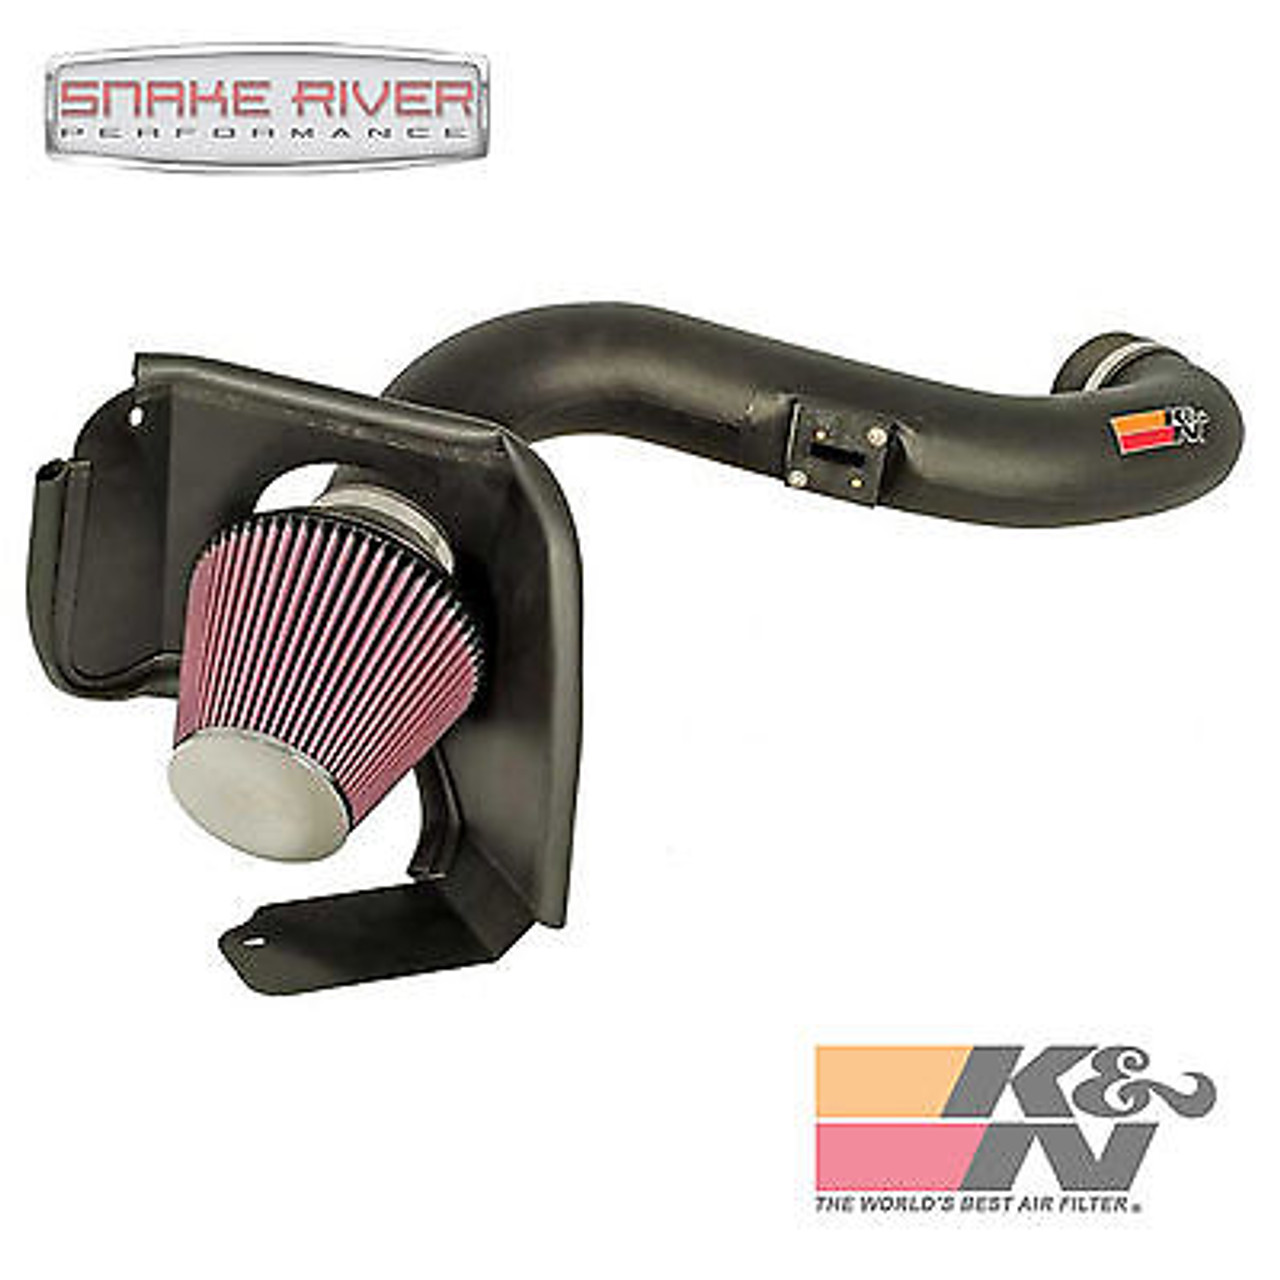 57-2573 - K&N PERFORMANCE FIPK COLD AIR INTAKE FOR 2006-2008 FORD EXPLORER 4.6L